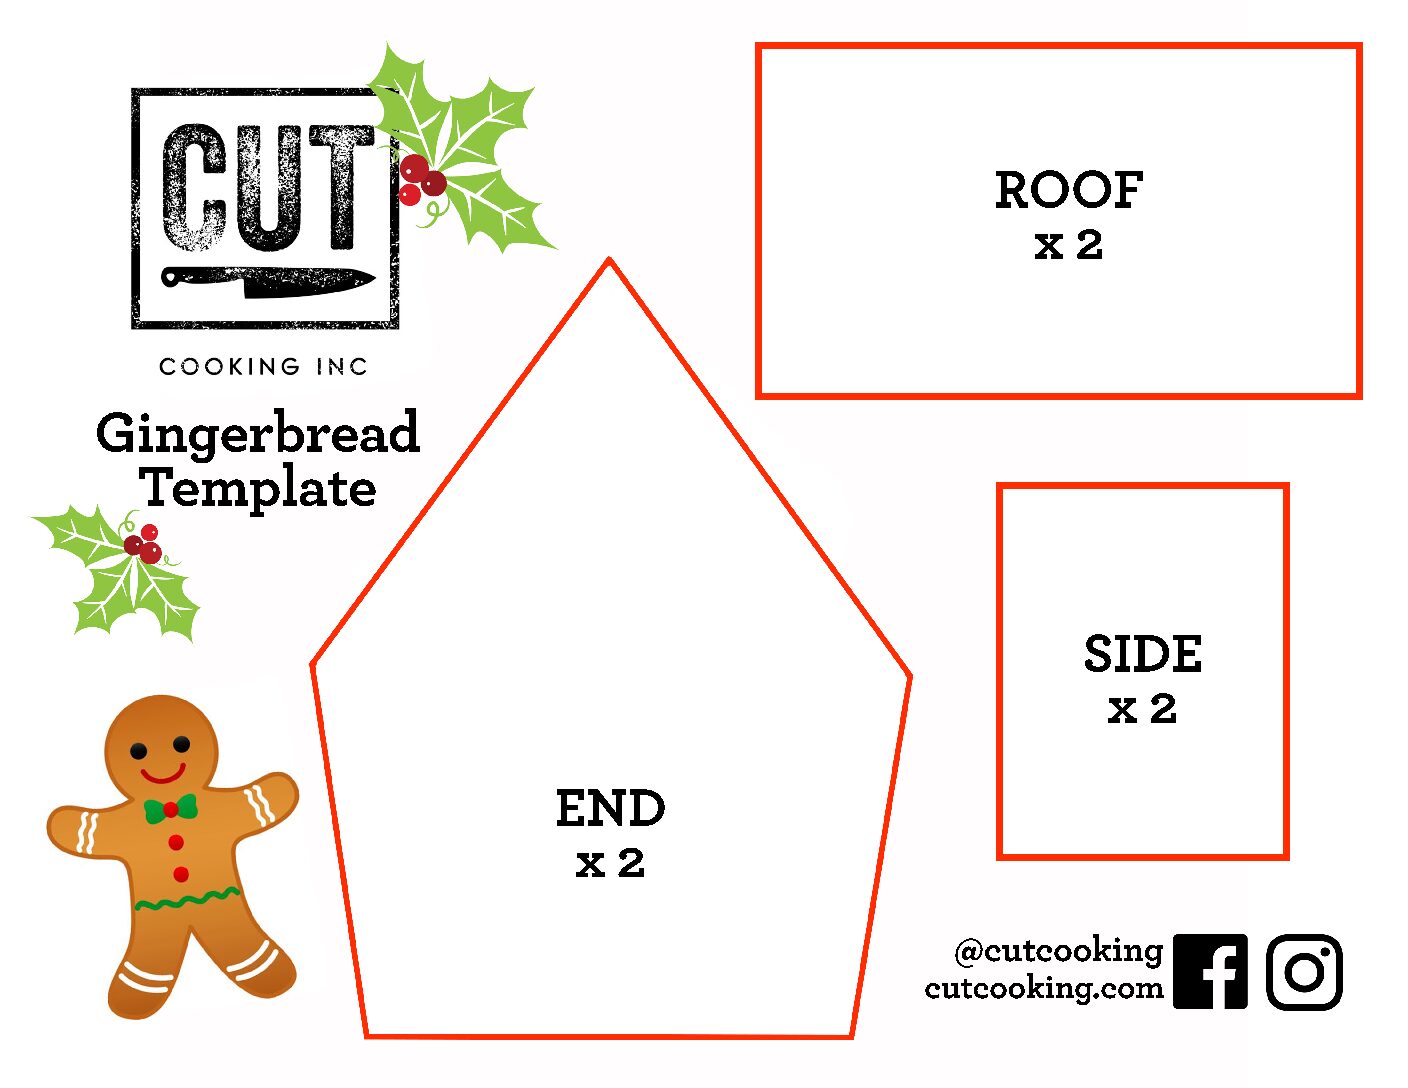 Gingerbread Houses CUT Cooking